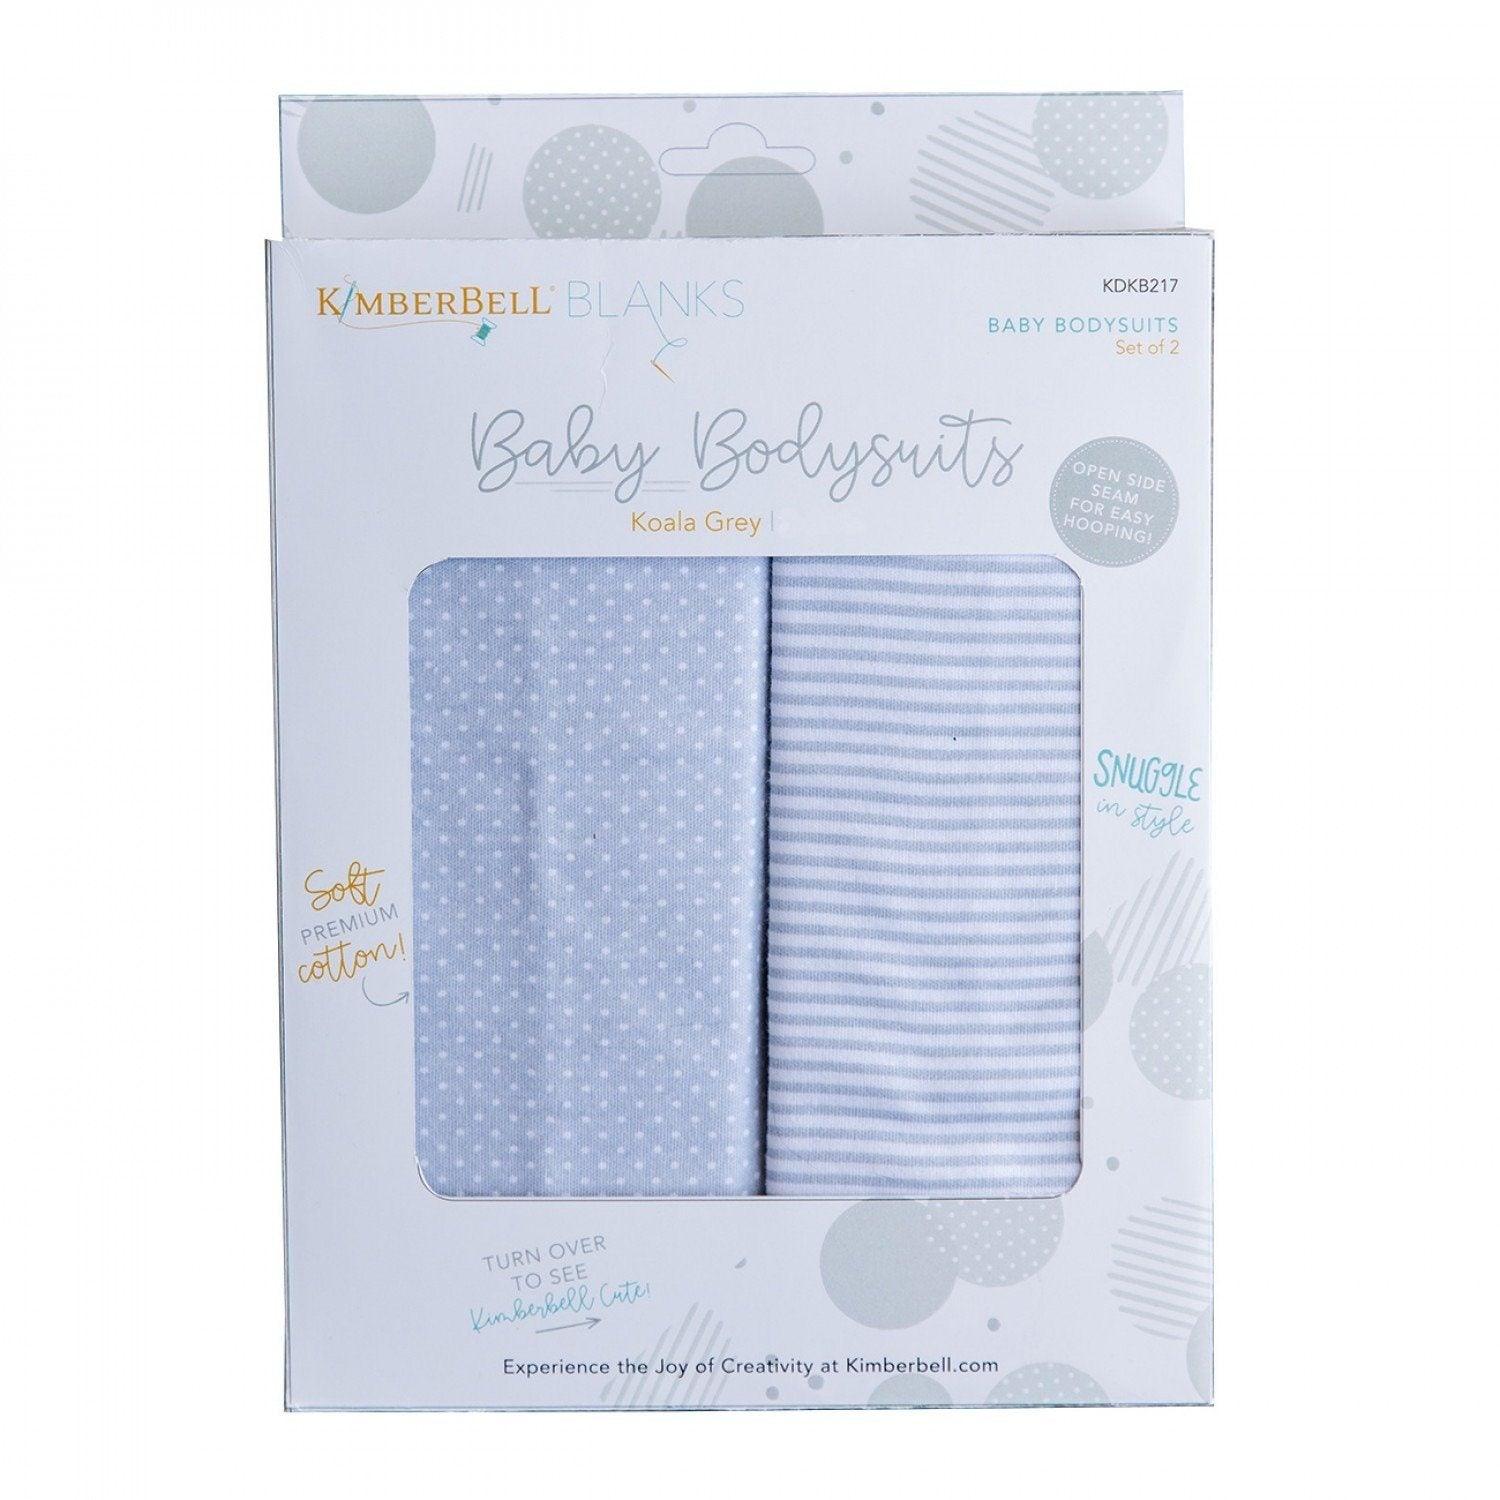 Baby Bodysuits - Koala Grey -  (9-12 Months) - Pack of 2 - Kimberbell - Kawartha Quilting and Sewing LTD.